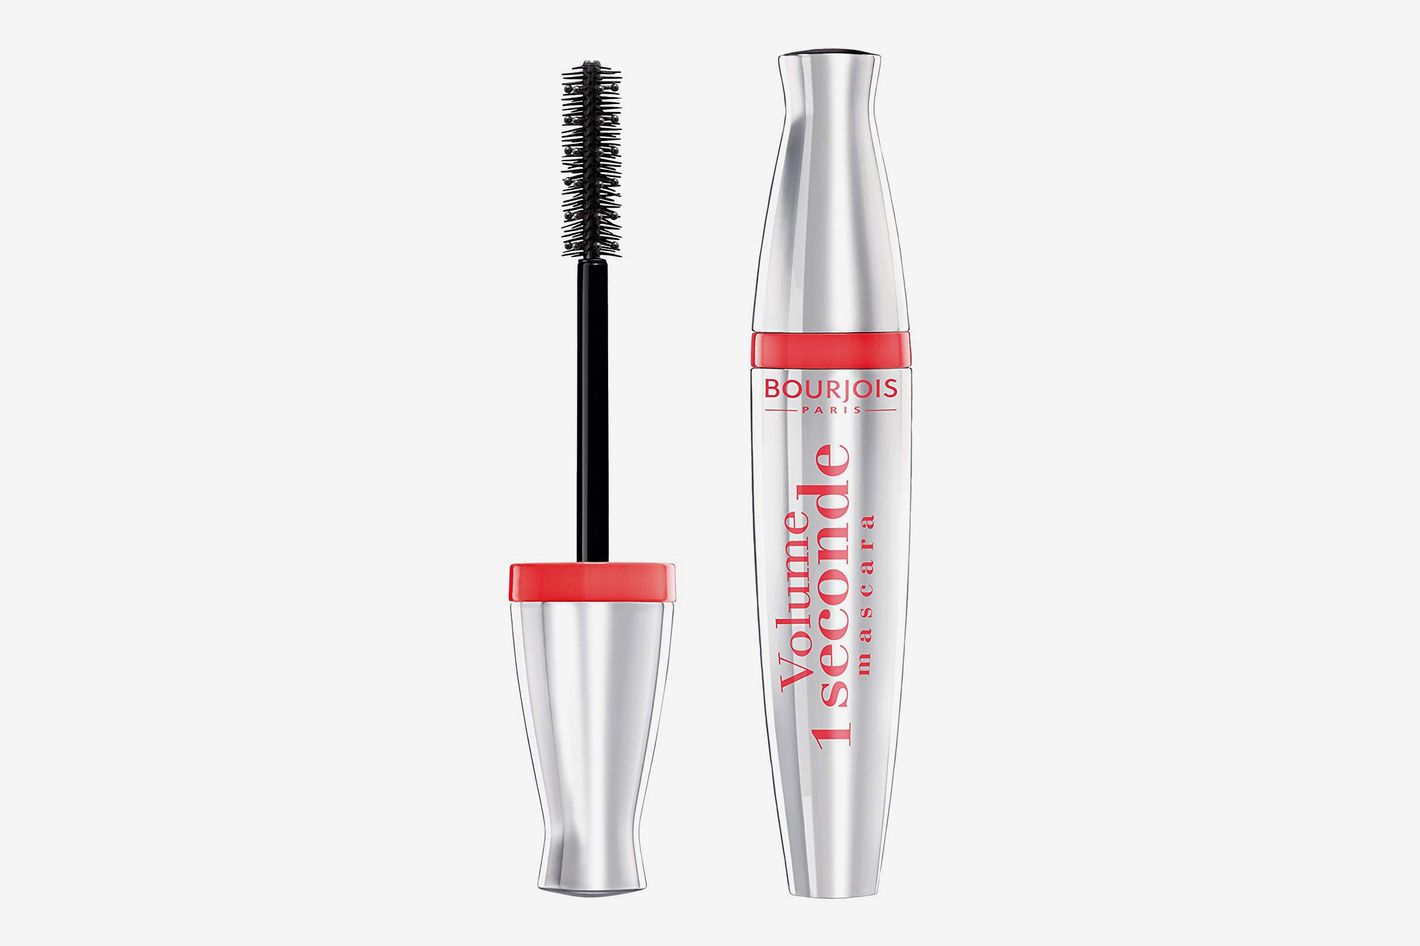 Bourjois Is the Best Cheap French Mascara Review 2018